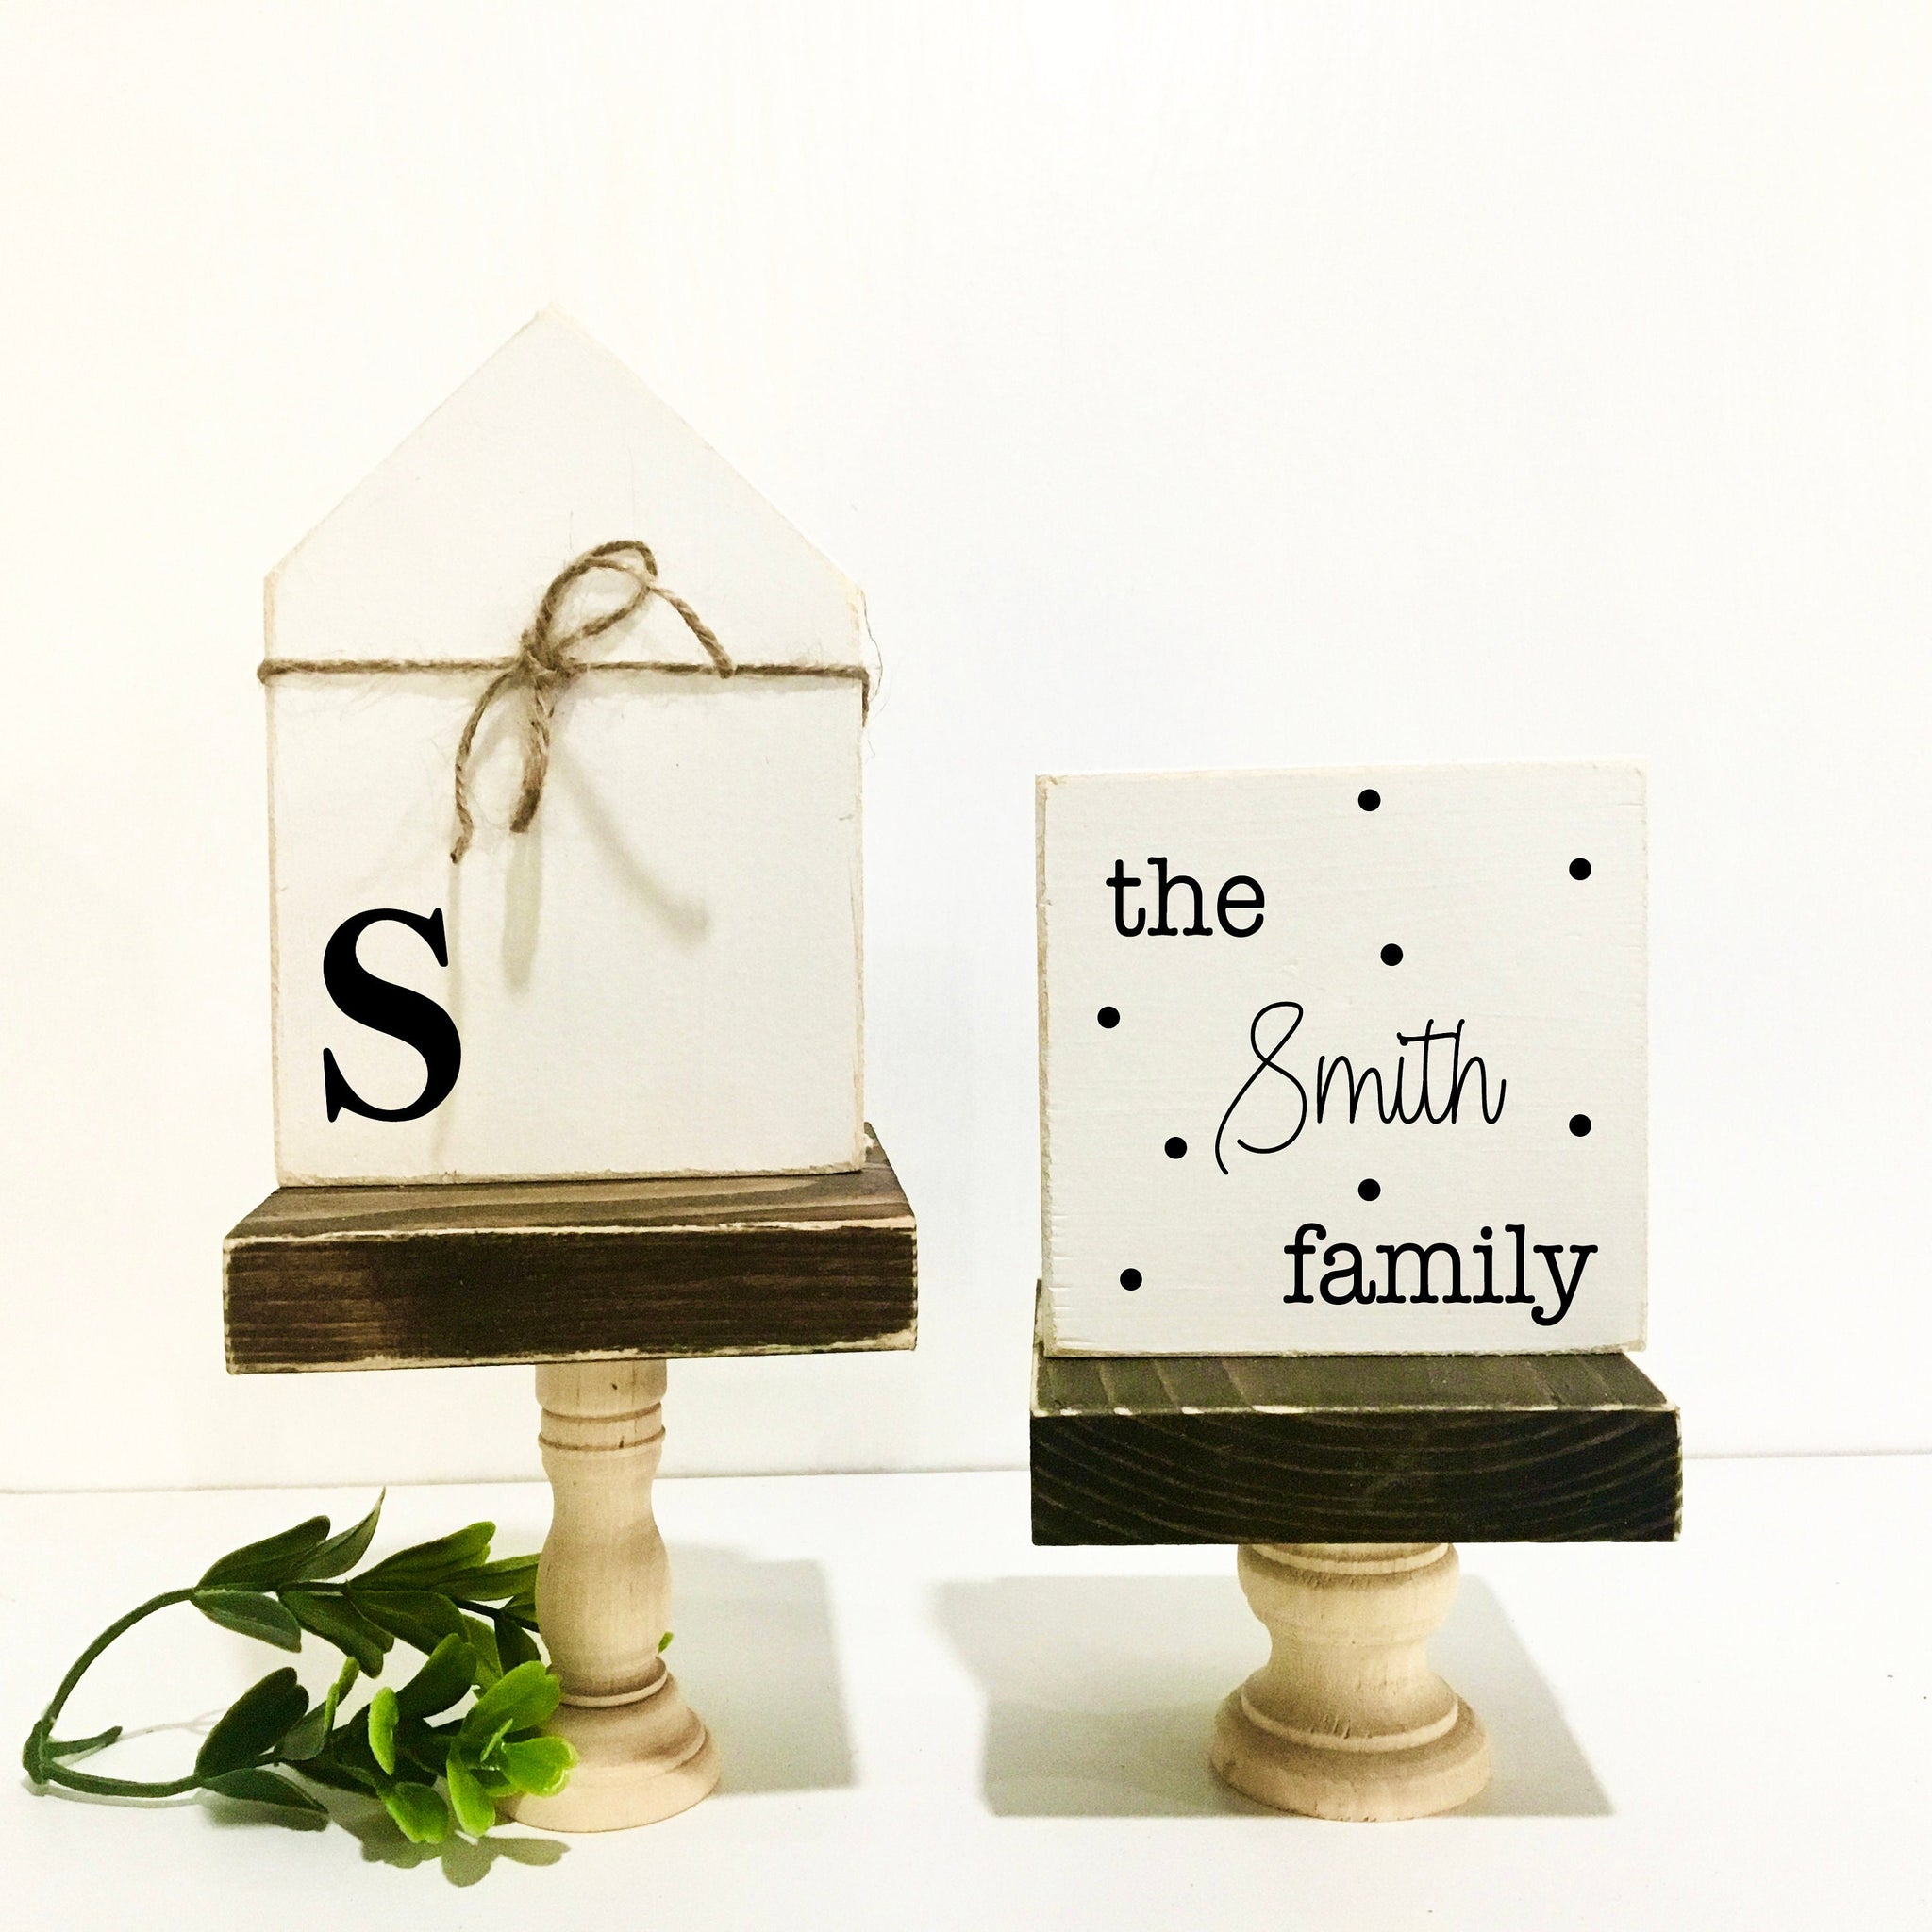 Home decor, Wooden house, Tiered tray decor, Personalized gift, Wedding, Pedestals, Personalized sign, Farmhouse, Housewarming gift